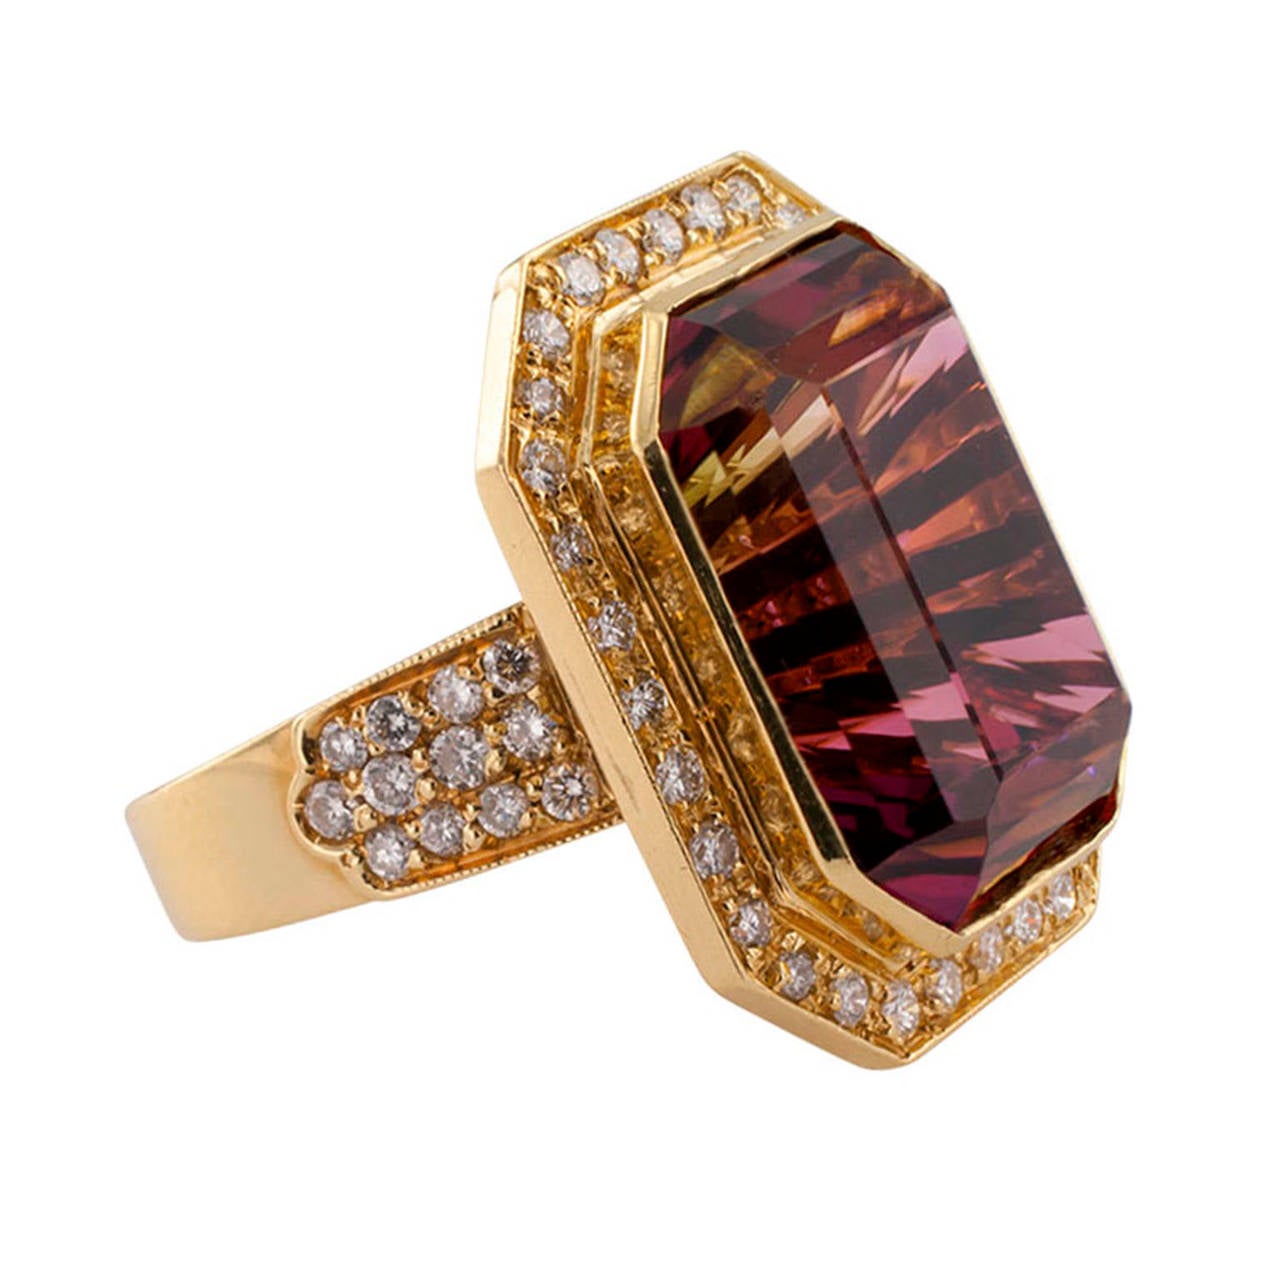 One of Webster's dictionary definitions for fascinate is: to attract by delightful qualities.  Depending on the angle from which it is viewed, this emerald-cut bi-color tourmaline weighing approximately 27.50 carats displays a fascinating and